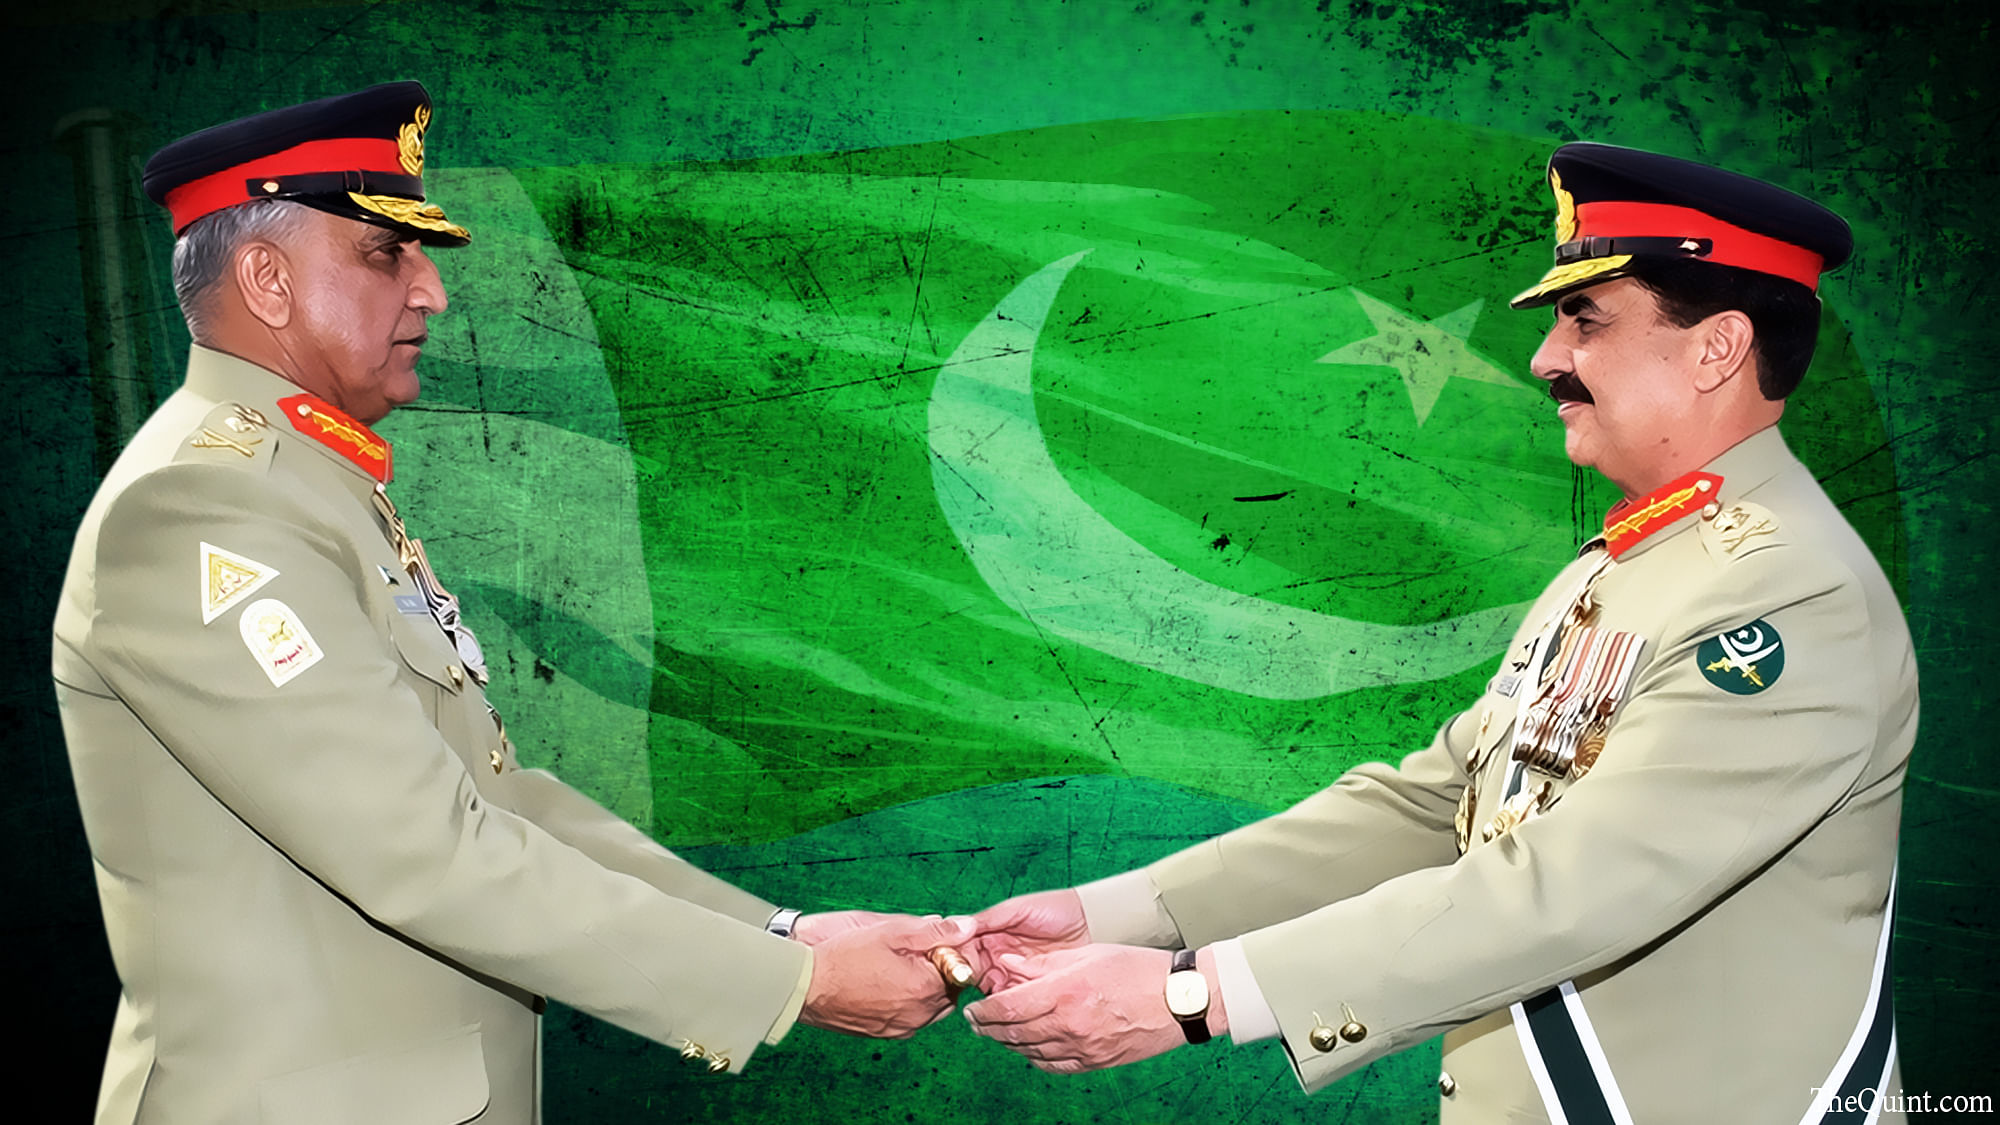  Pakistan’s outgoing Army Chief Gen Raheel Sharif (R) hands over a ceremonial baton to his successor Gen Qamar Javed Bajwa (L) during the Change of Command ceremony in Rawalpindi, Pakistan on 29 November 2016. (Photo: AP/Altered by The Quint)